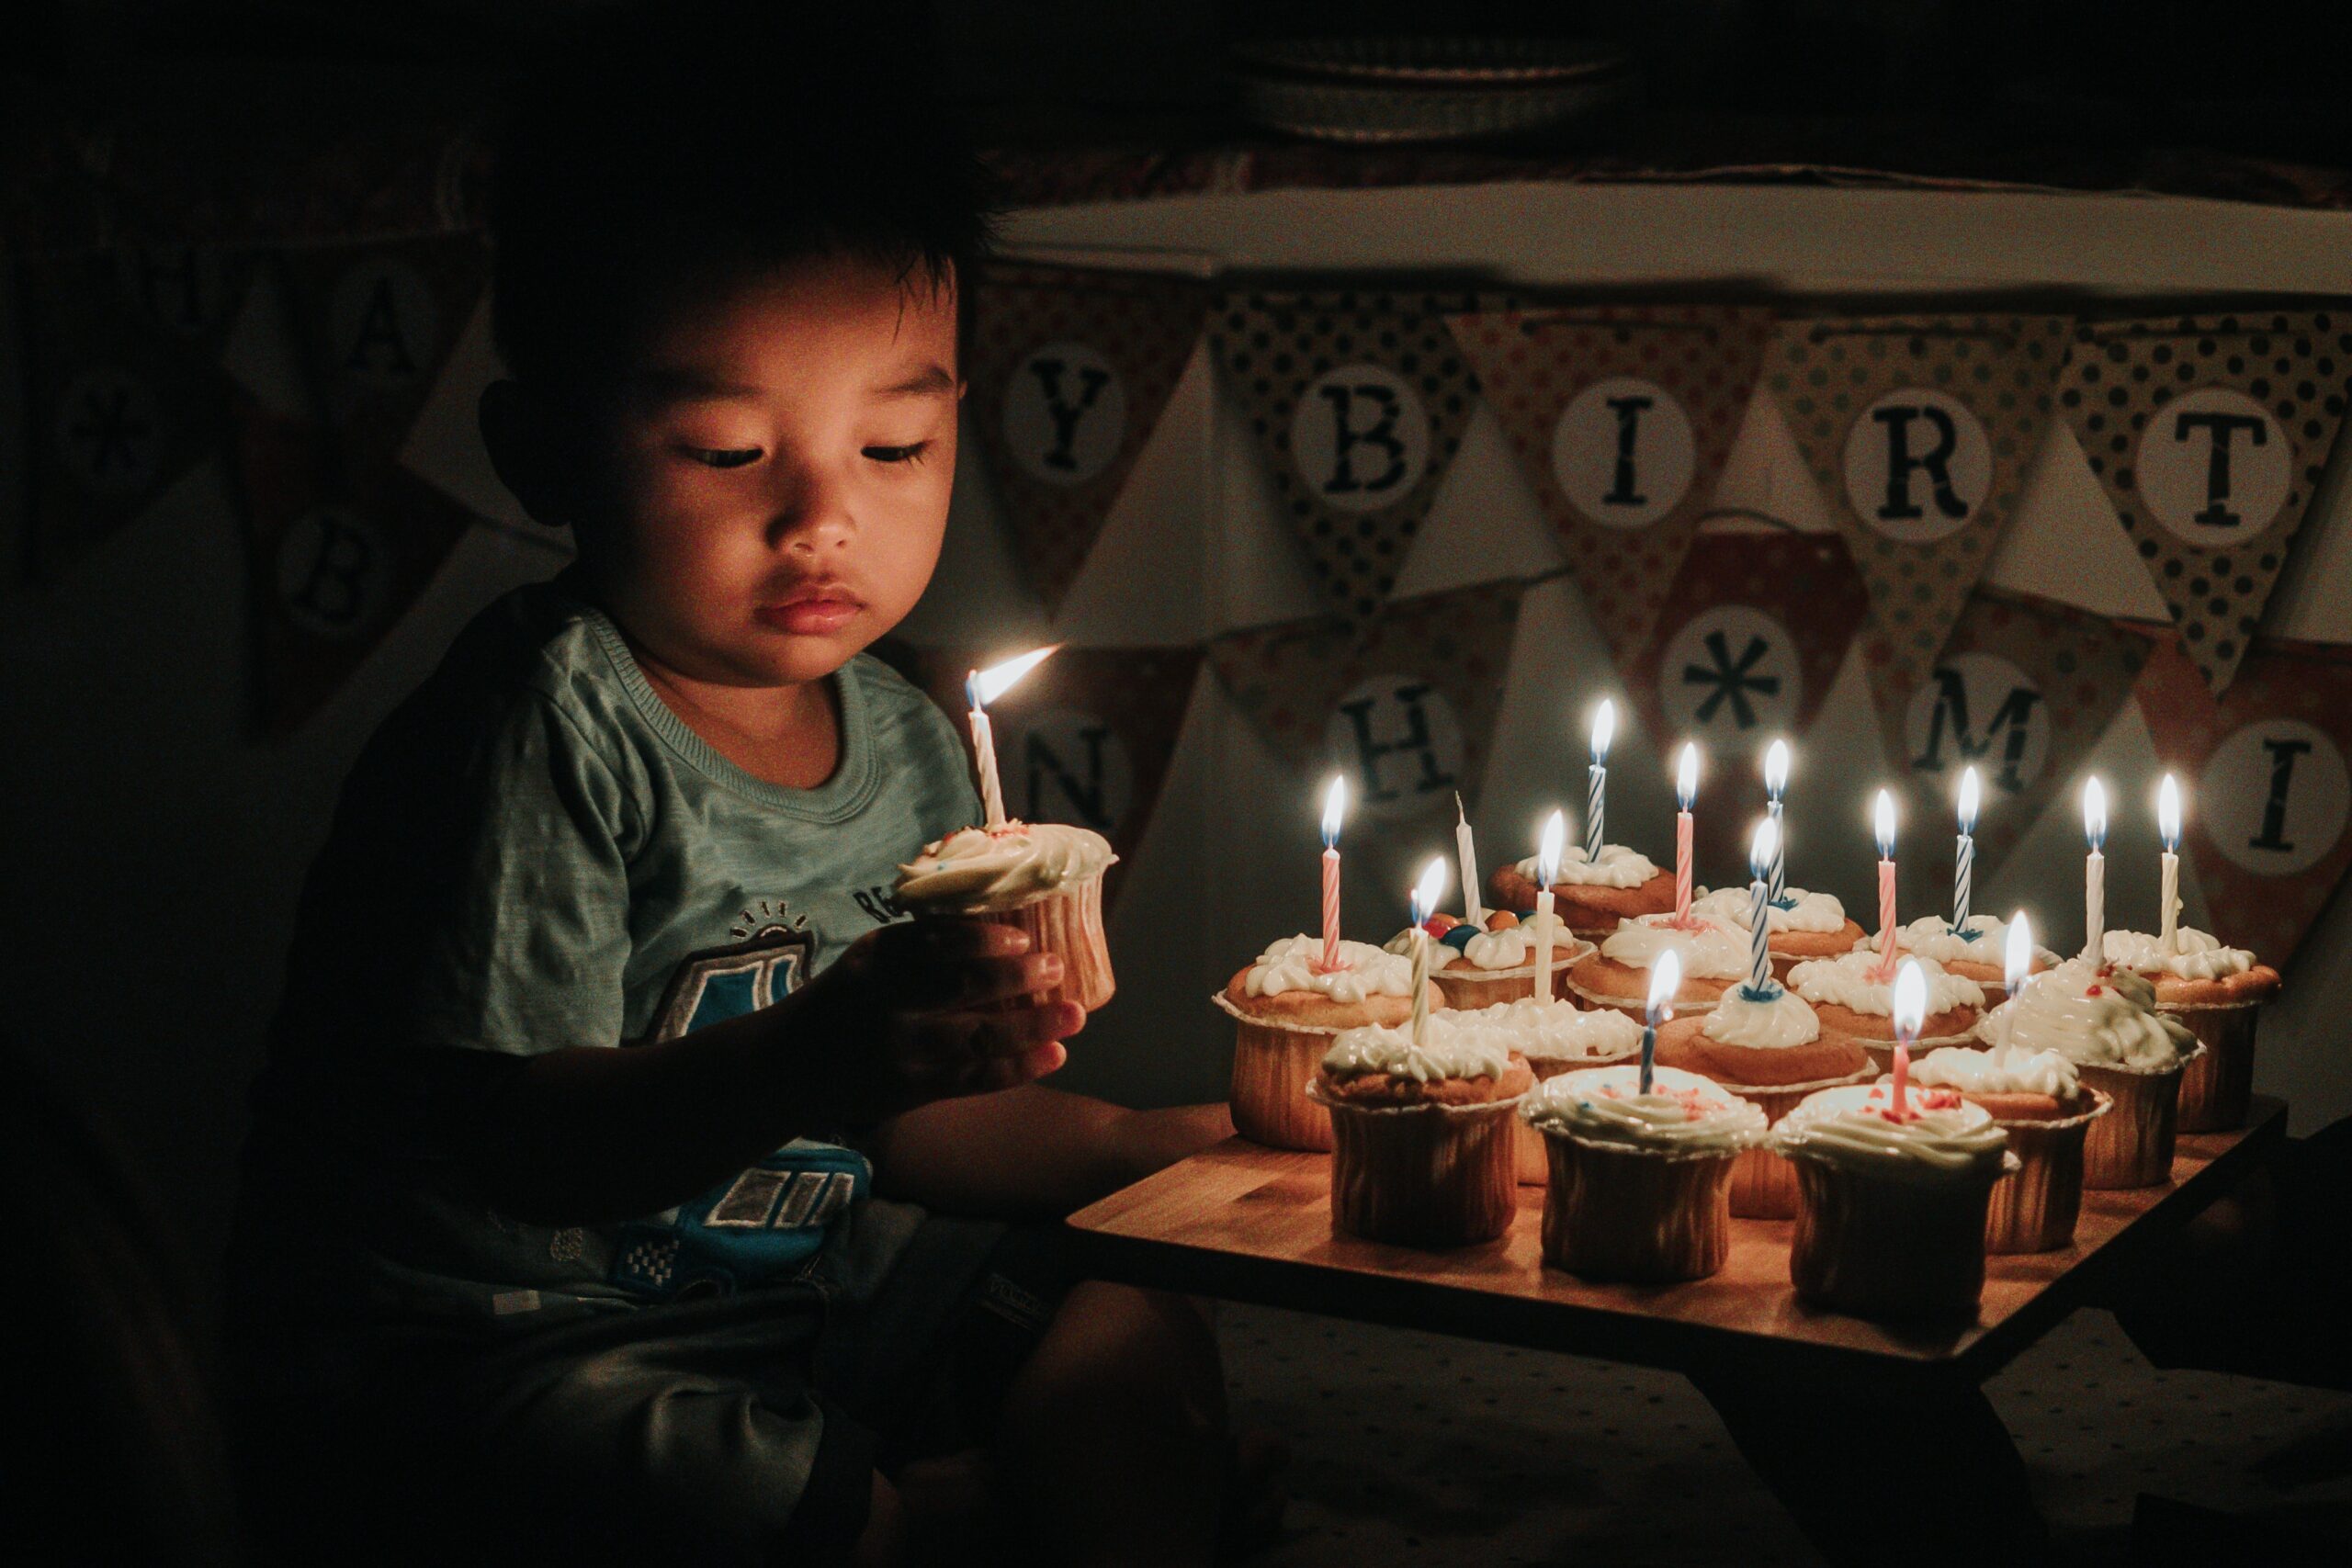 Child holding birthday cupcake with candle